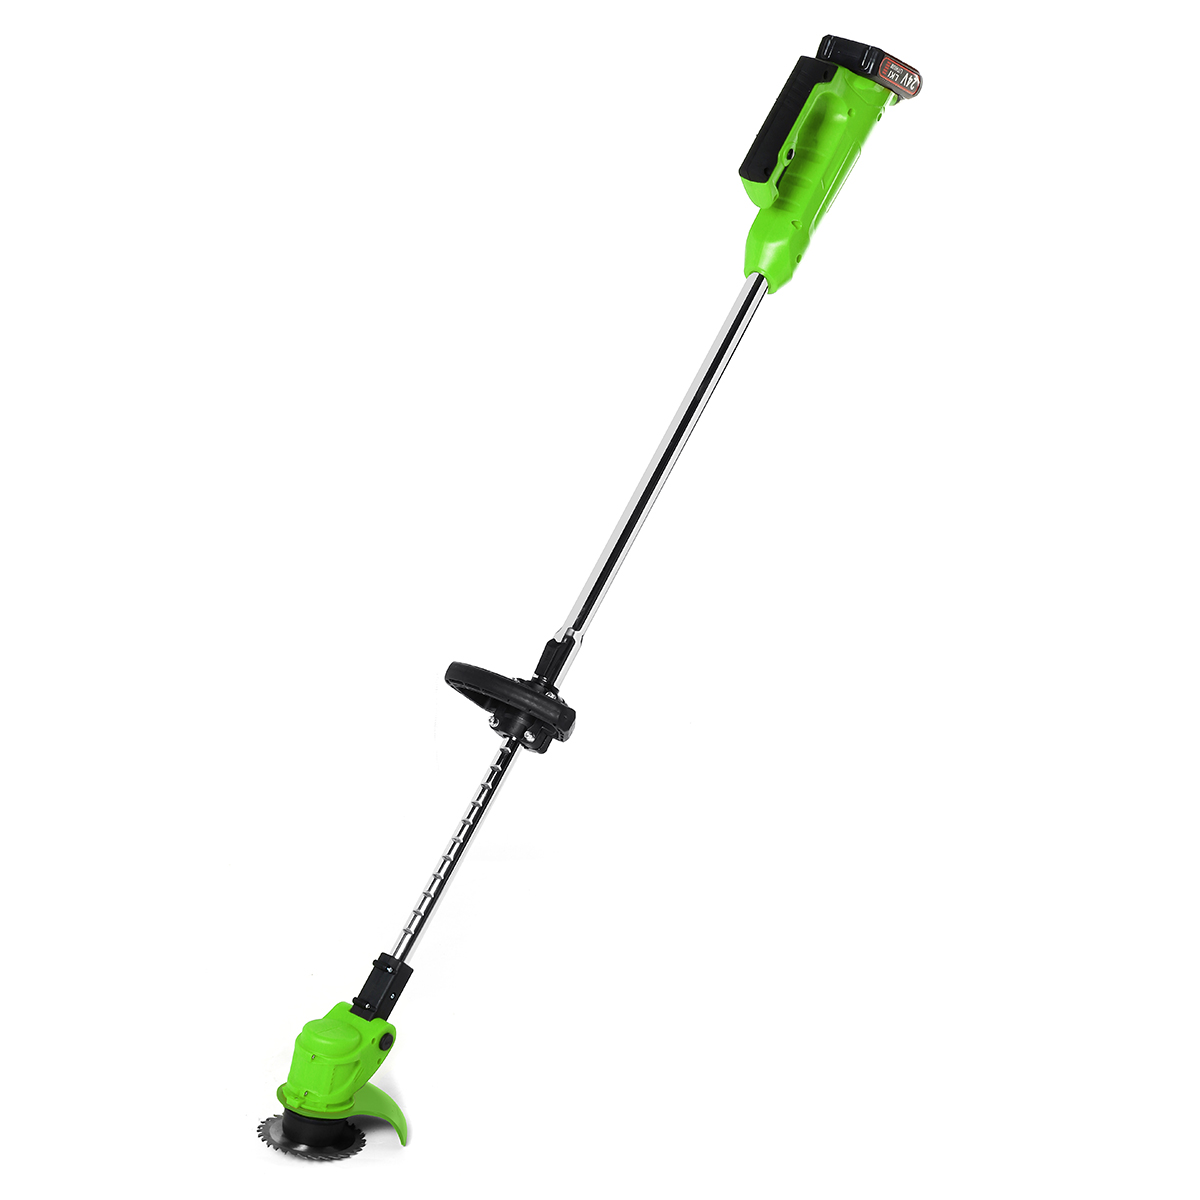 12V/24V Cordless Grass Trimmer 2000mAh Electric Trimmer Power Garden Tools Electric Lawn Mower With 2pcs Li-ion Battery Charger